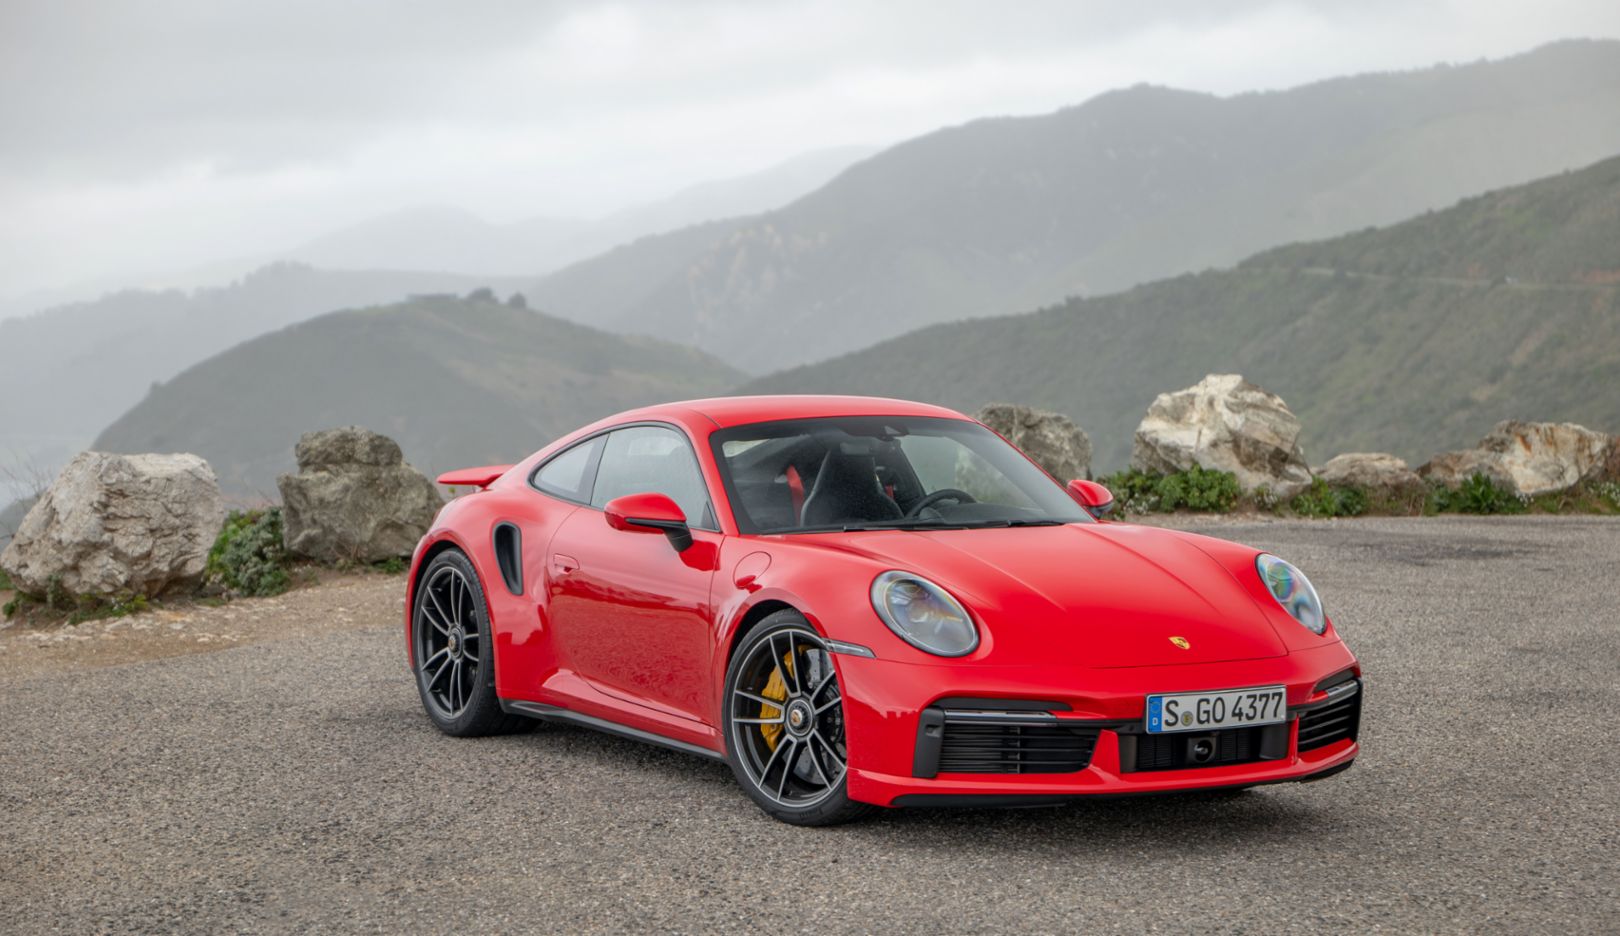 Porsche delivers 53,125 cars in the first quarter of 2020 - Image 1